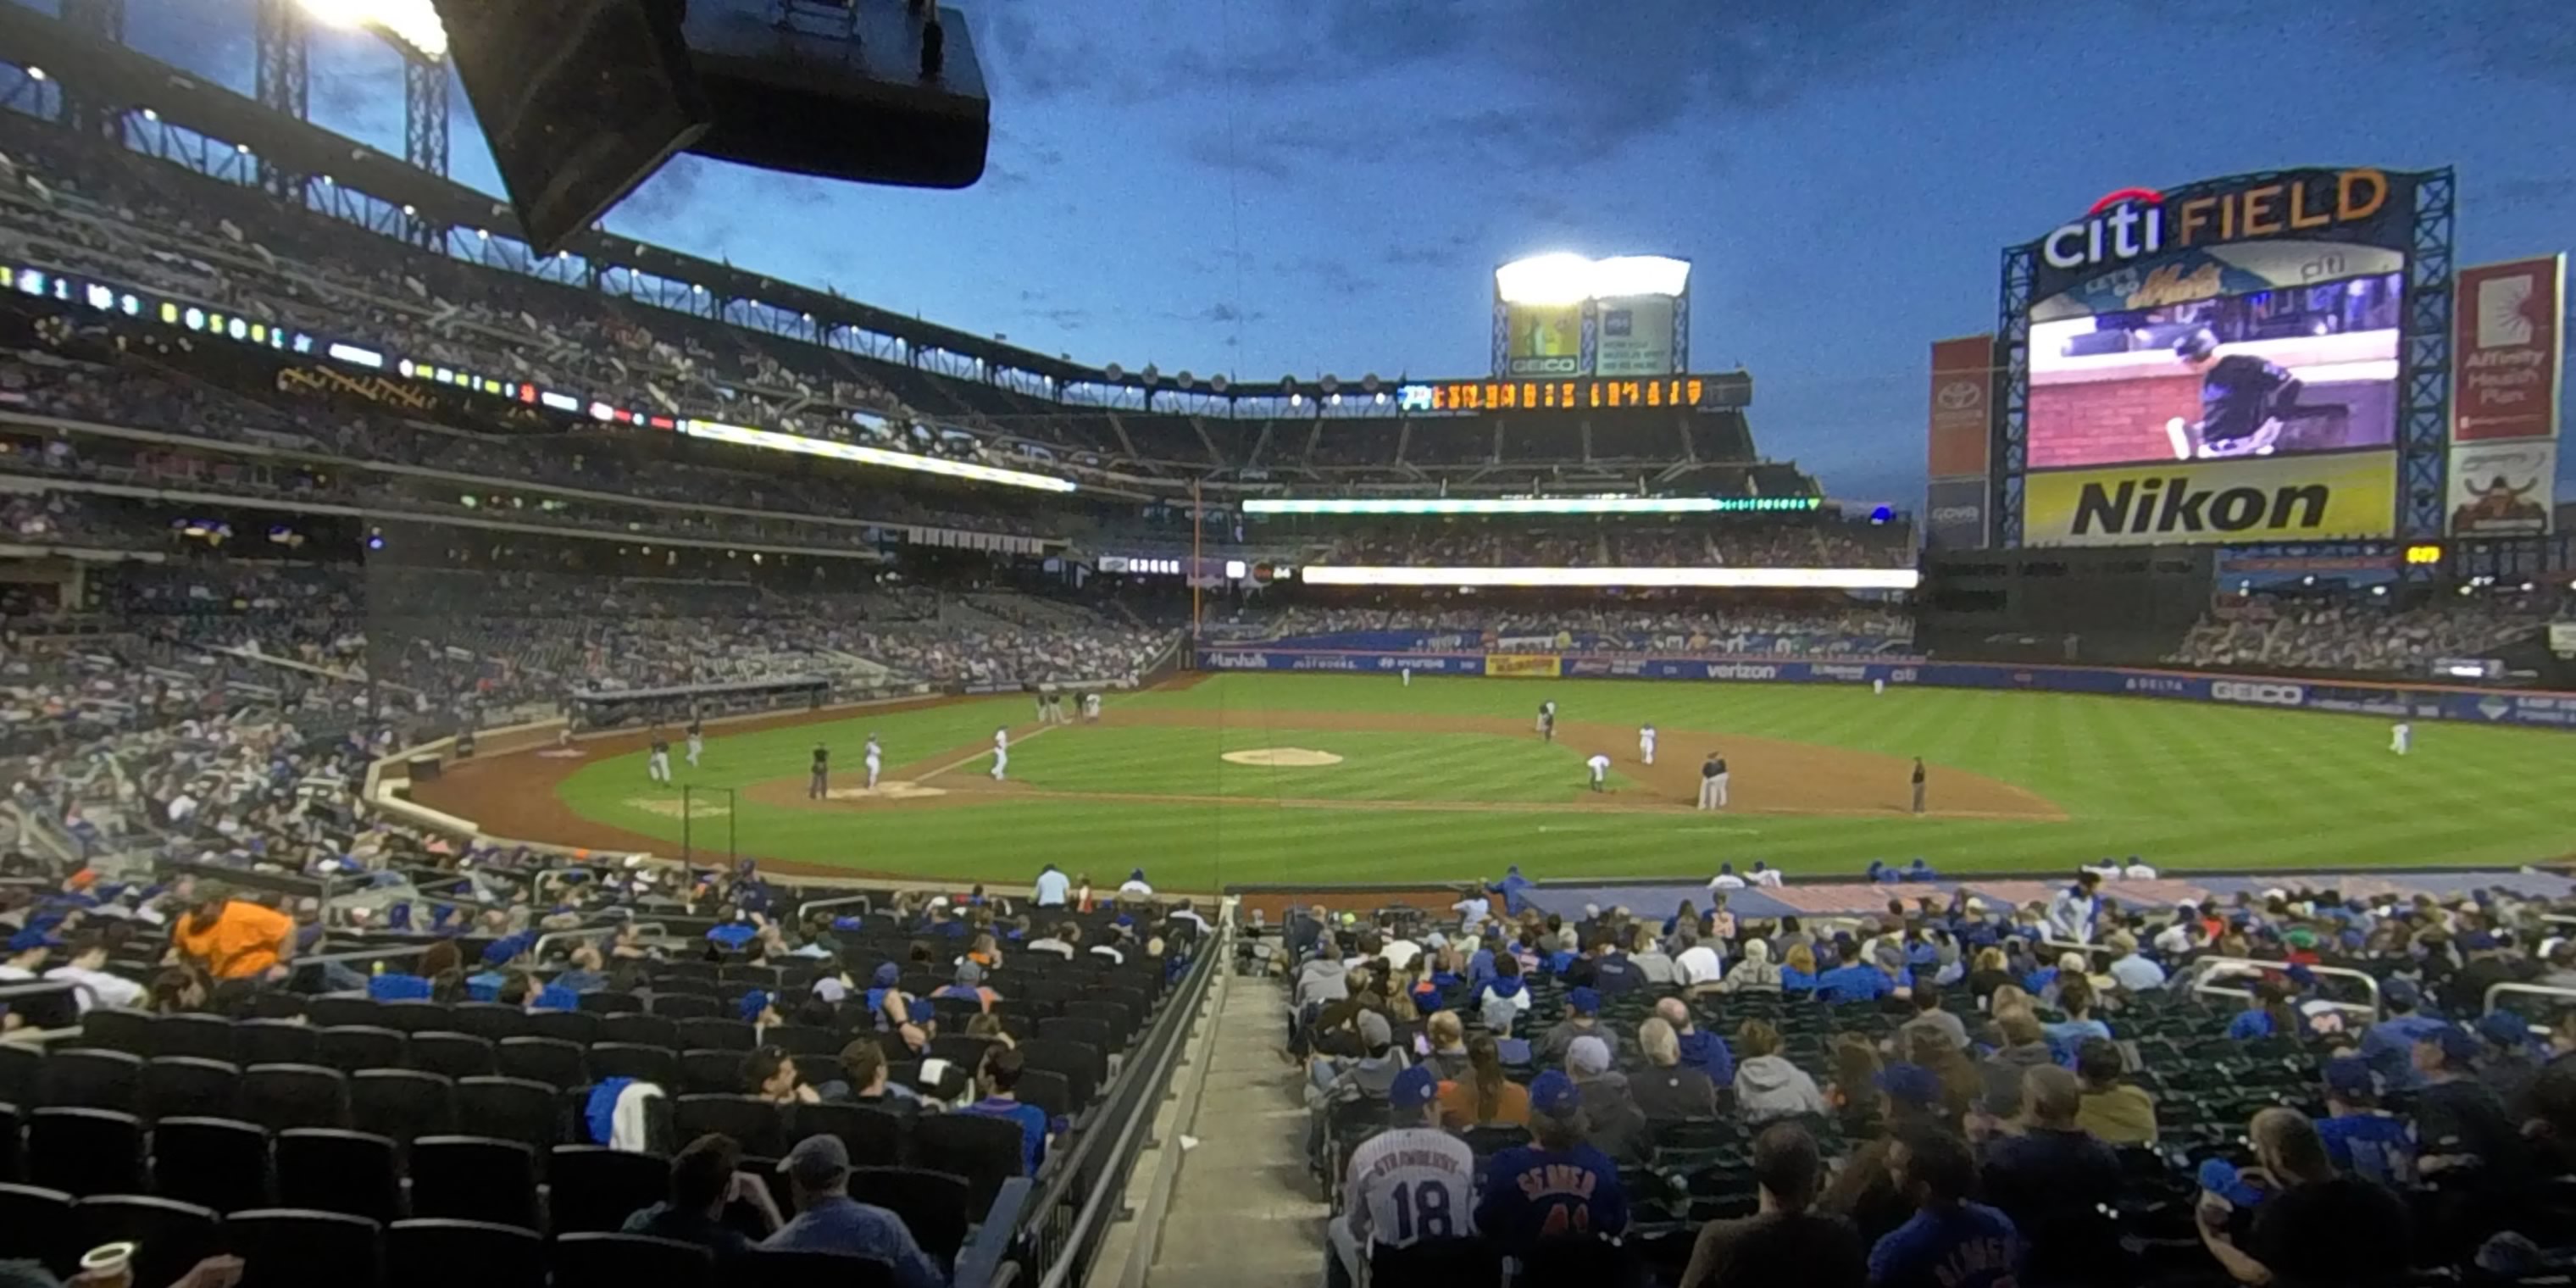 sterling suite 1 panoramic seat view  - citi field